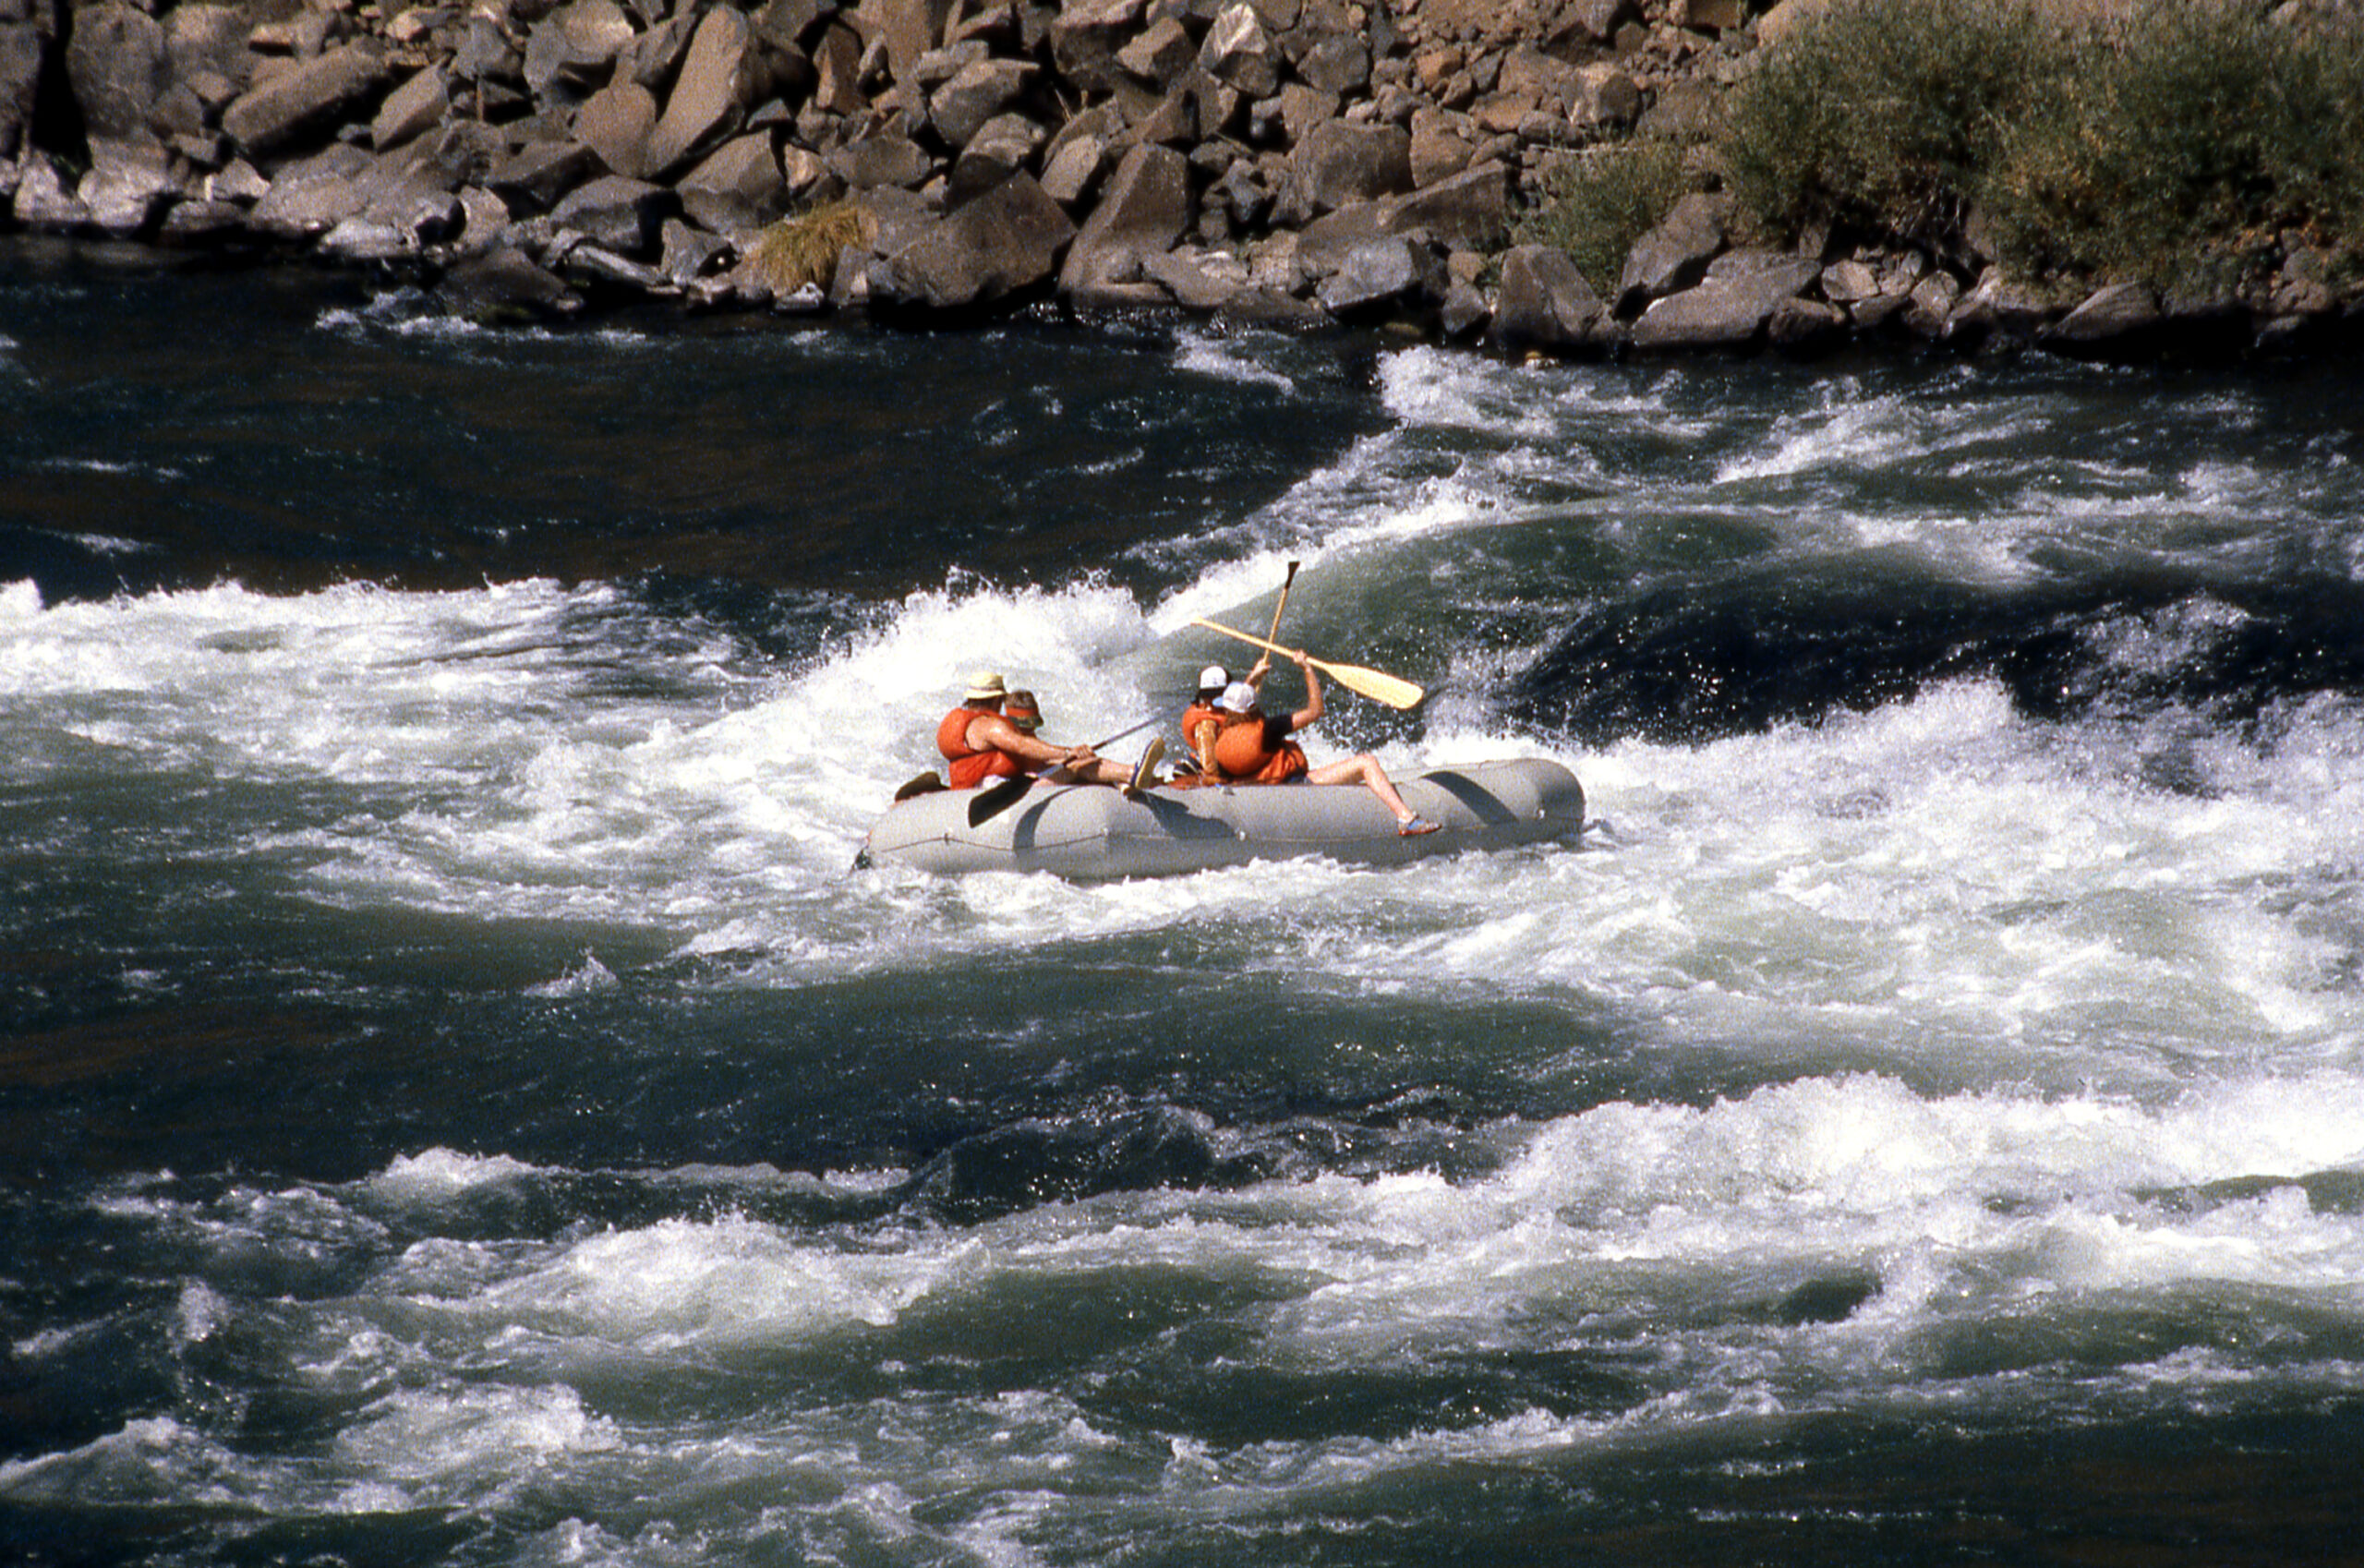 Adventure on the Rapids: Exploring Whitewater with Inflatable Kayaks